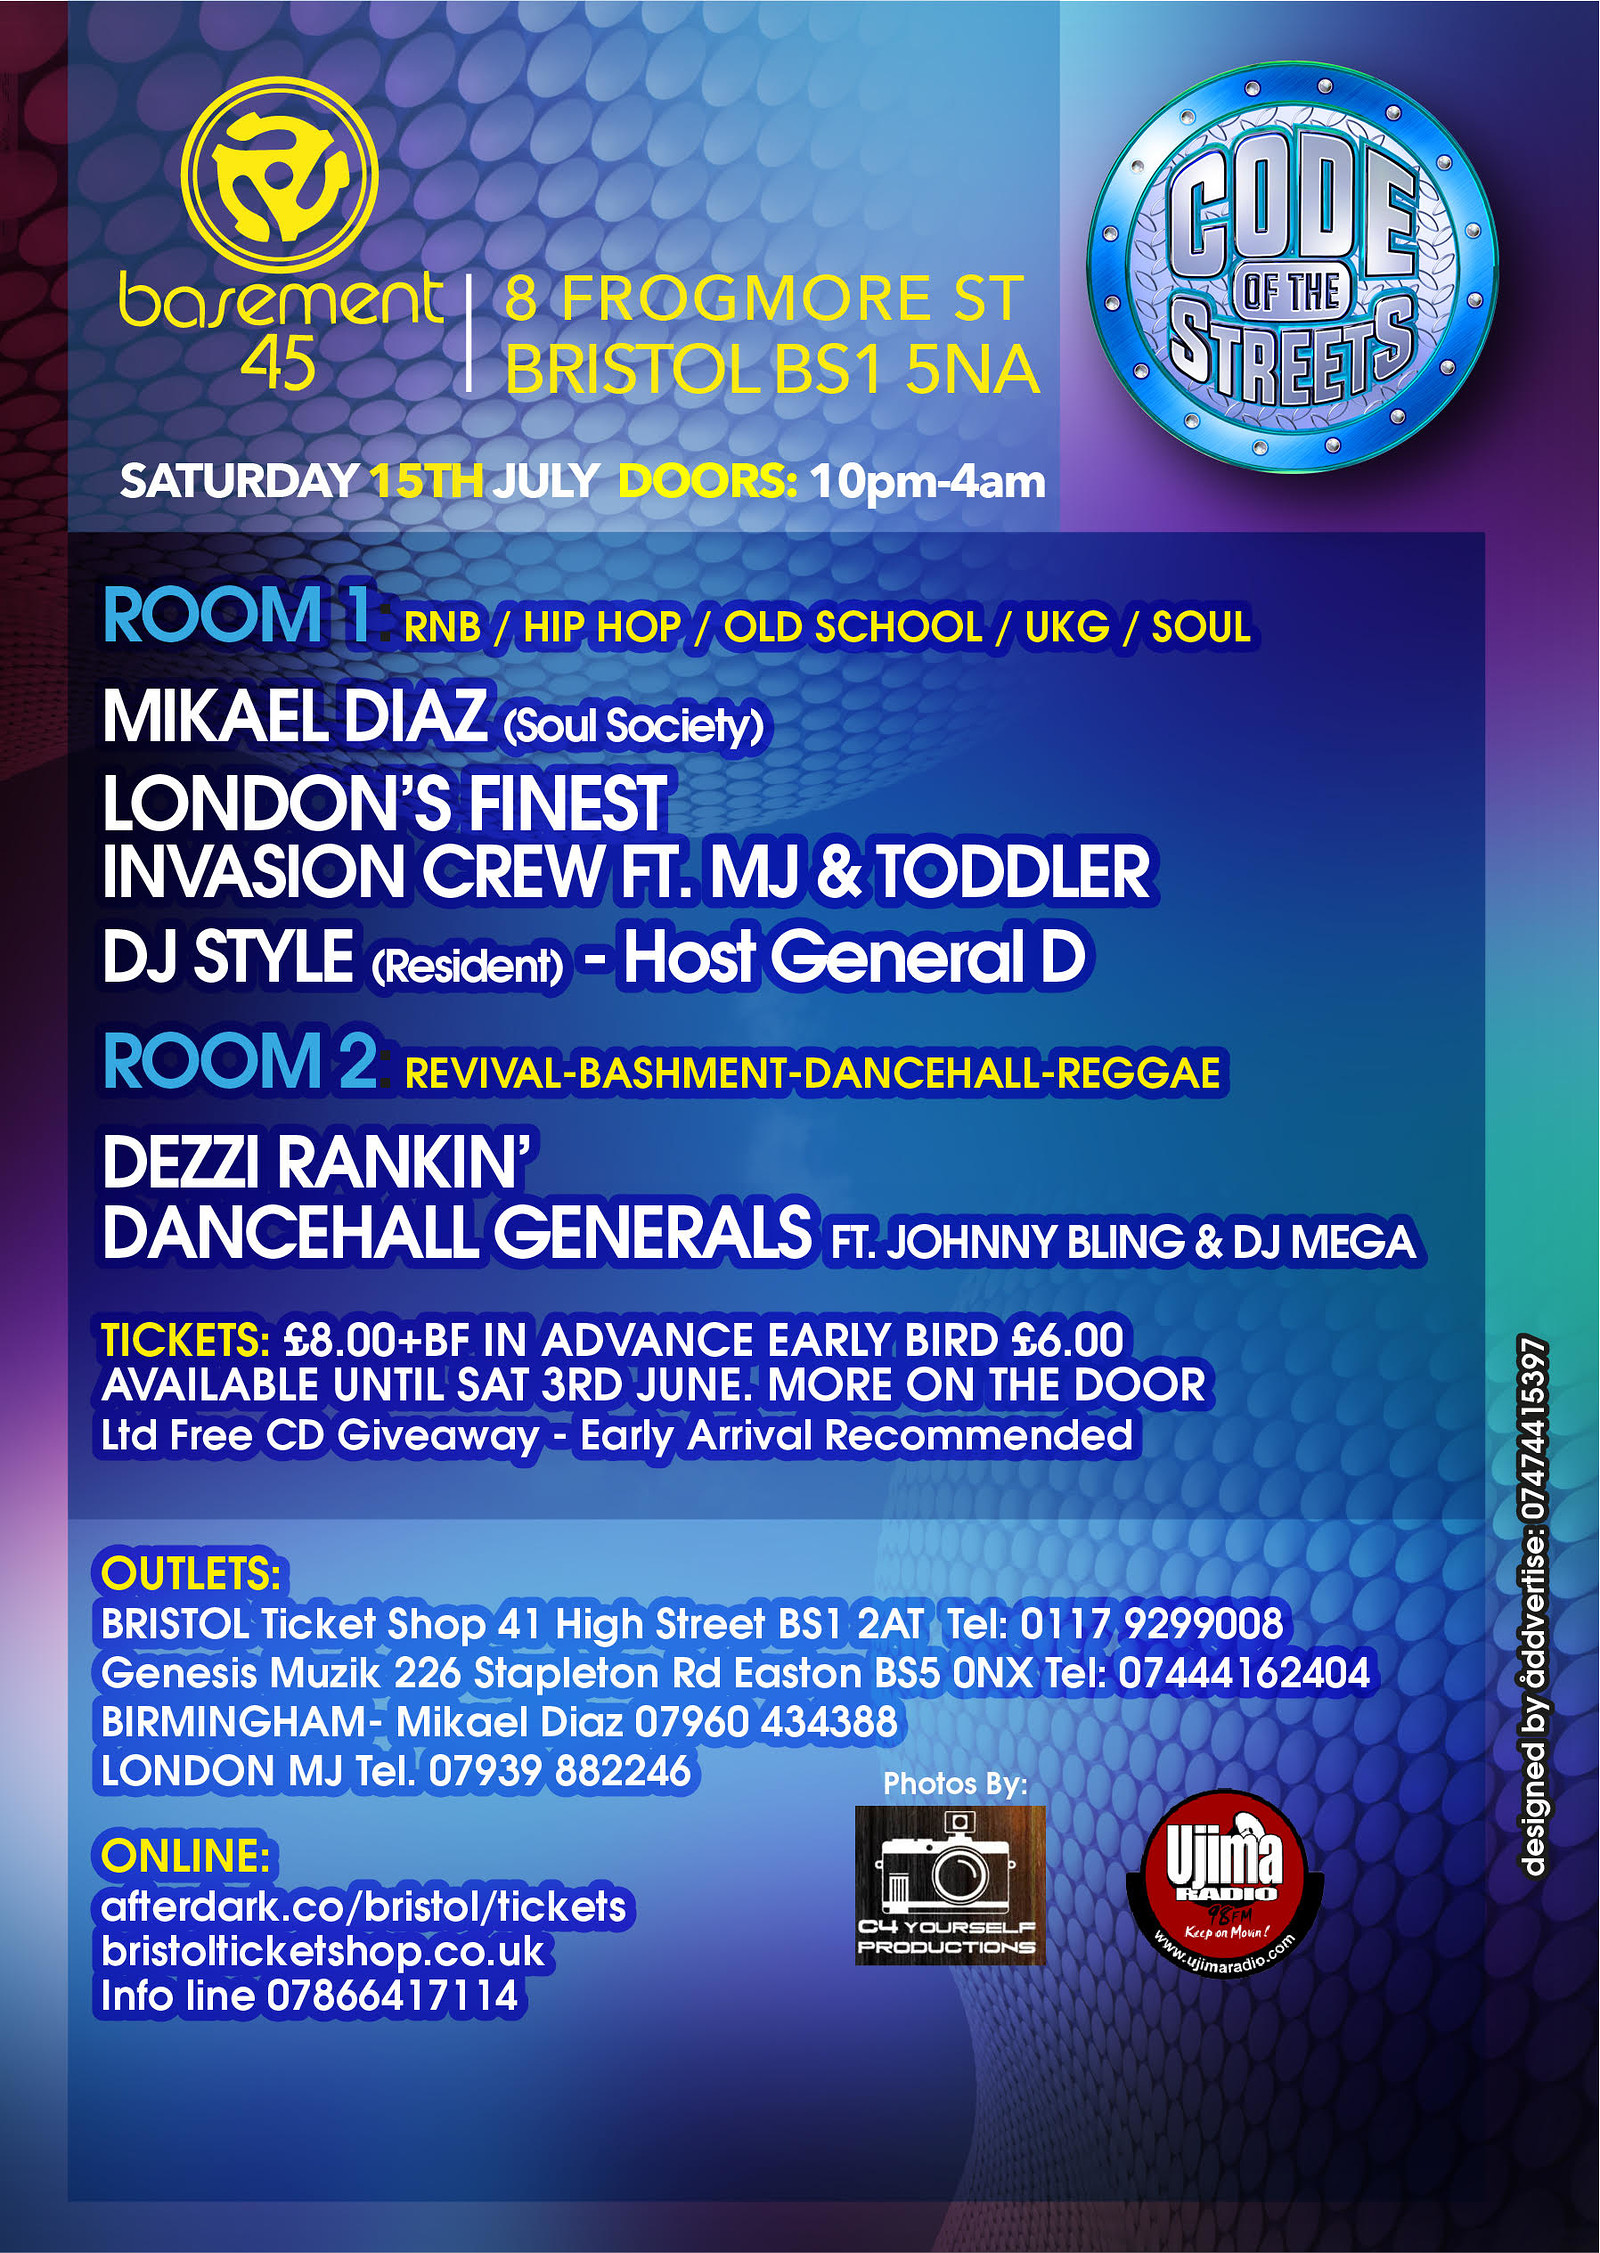 Code Of The Streets Sat 15th July at Basement 45